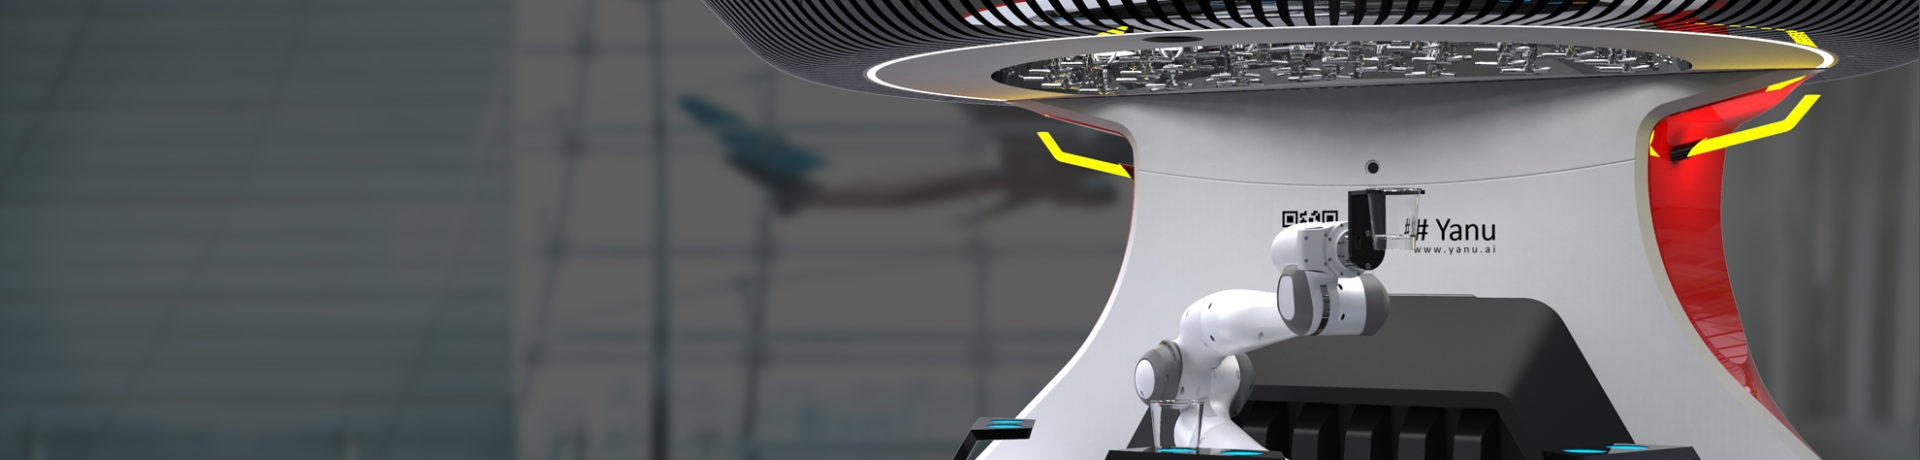 Solid Edge from Siemens was used to develop Yanu, a fully autonomous A.I. and robot empowered bartending unit. It serves drinks, handles payments, identifies and communicates with clients.